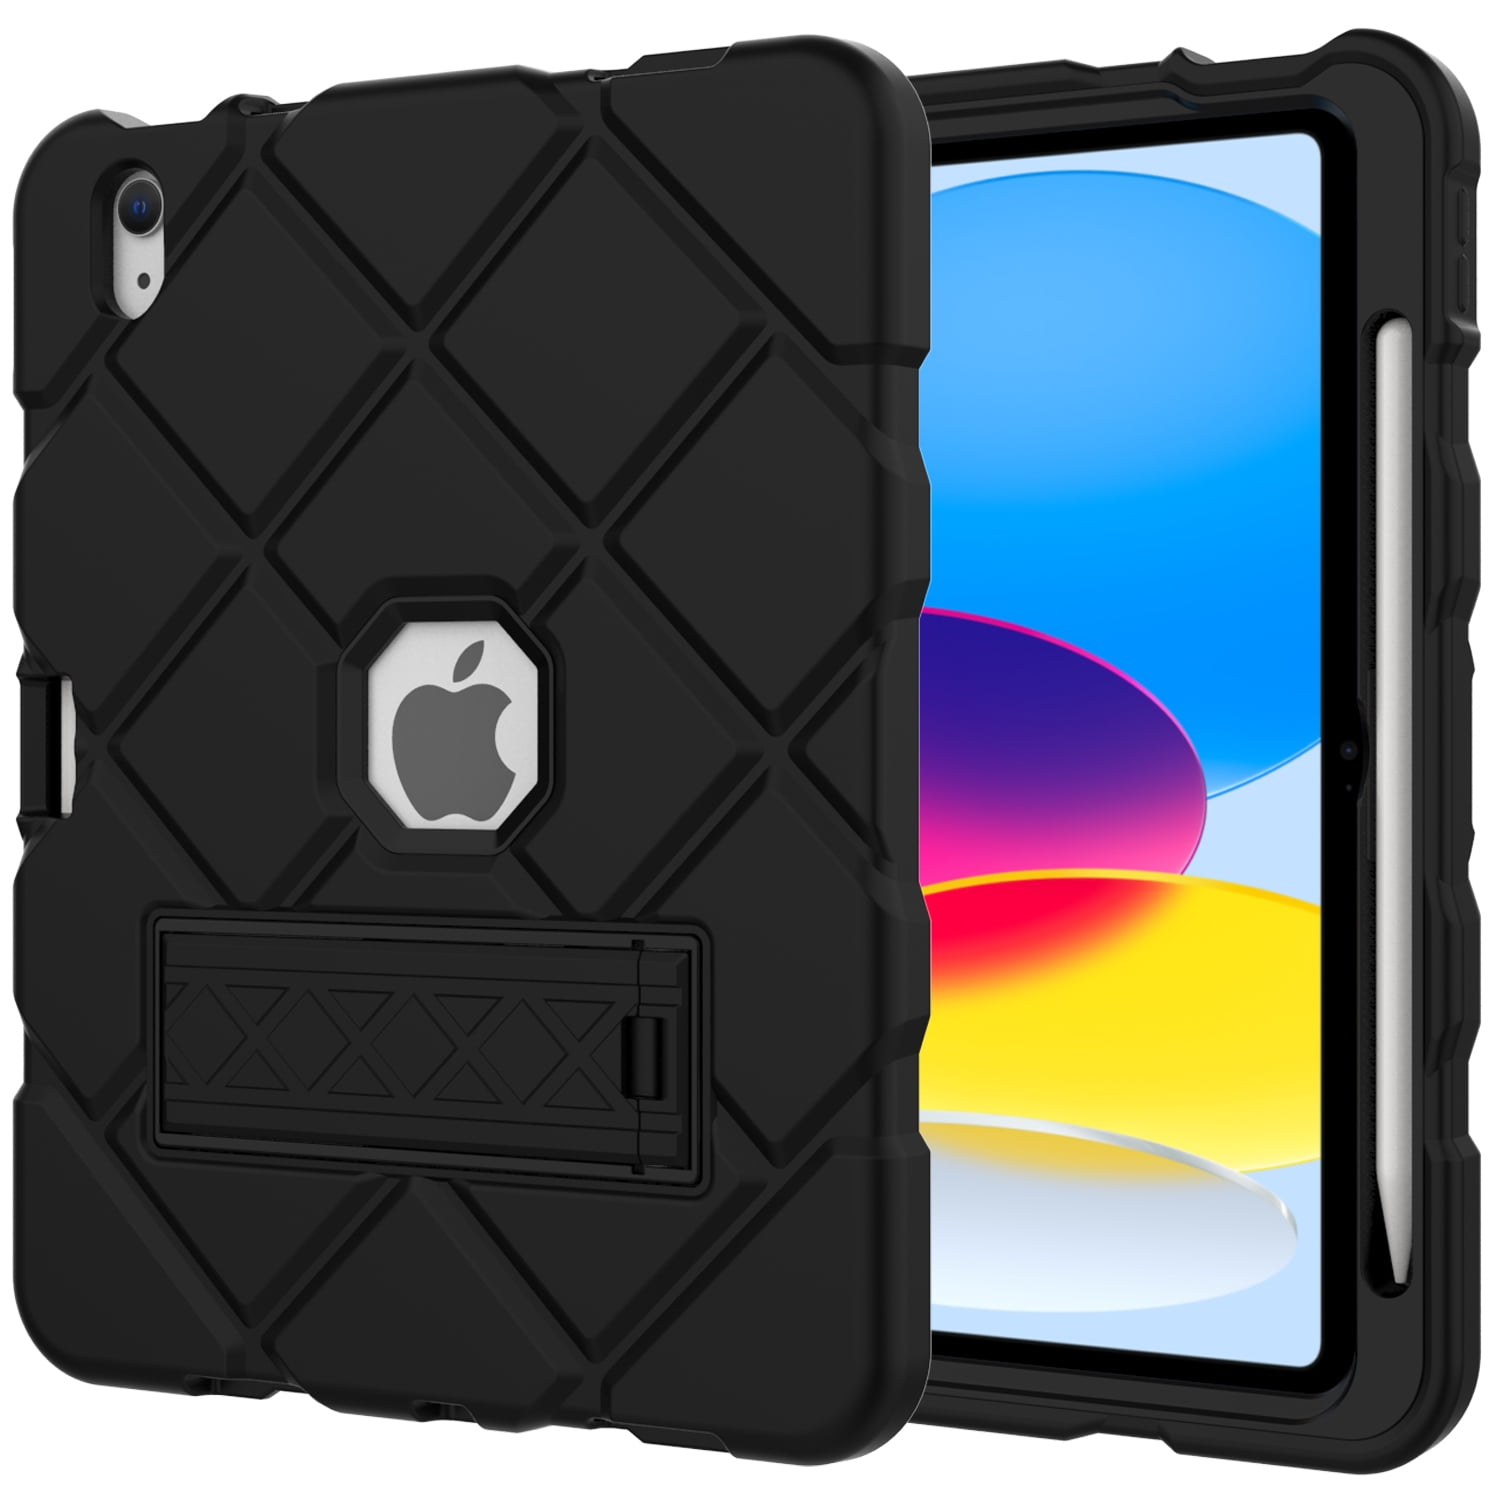 Dteck for iPad 10th Generation,iPad 10.9 Inch Case with Foldable Kickstand  Heavy Duty Shockproof Rugged Protection Cover for iPad 10th Generation Case